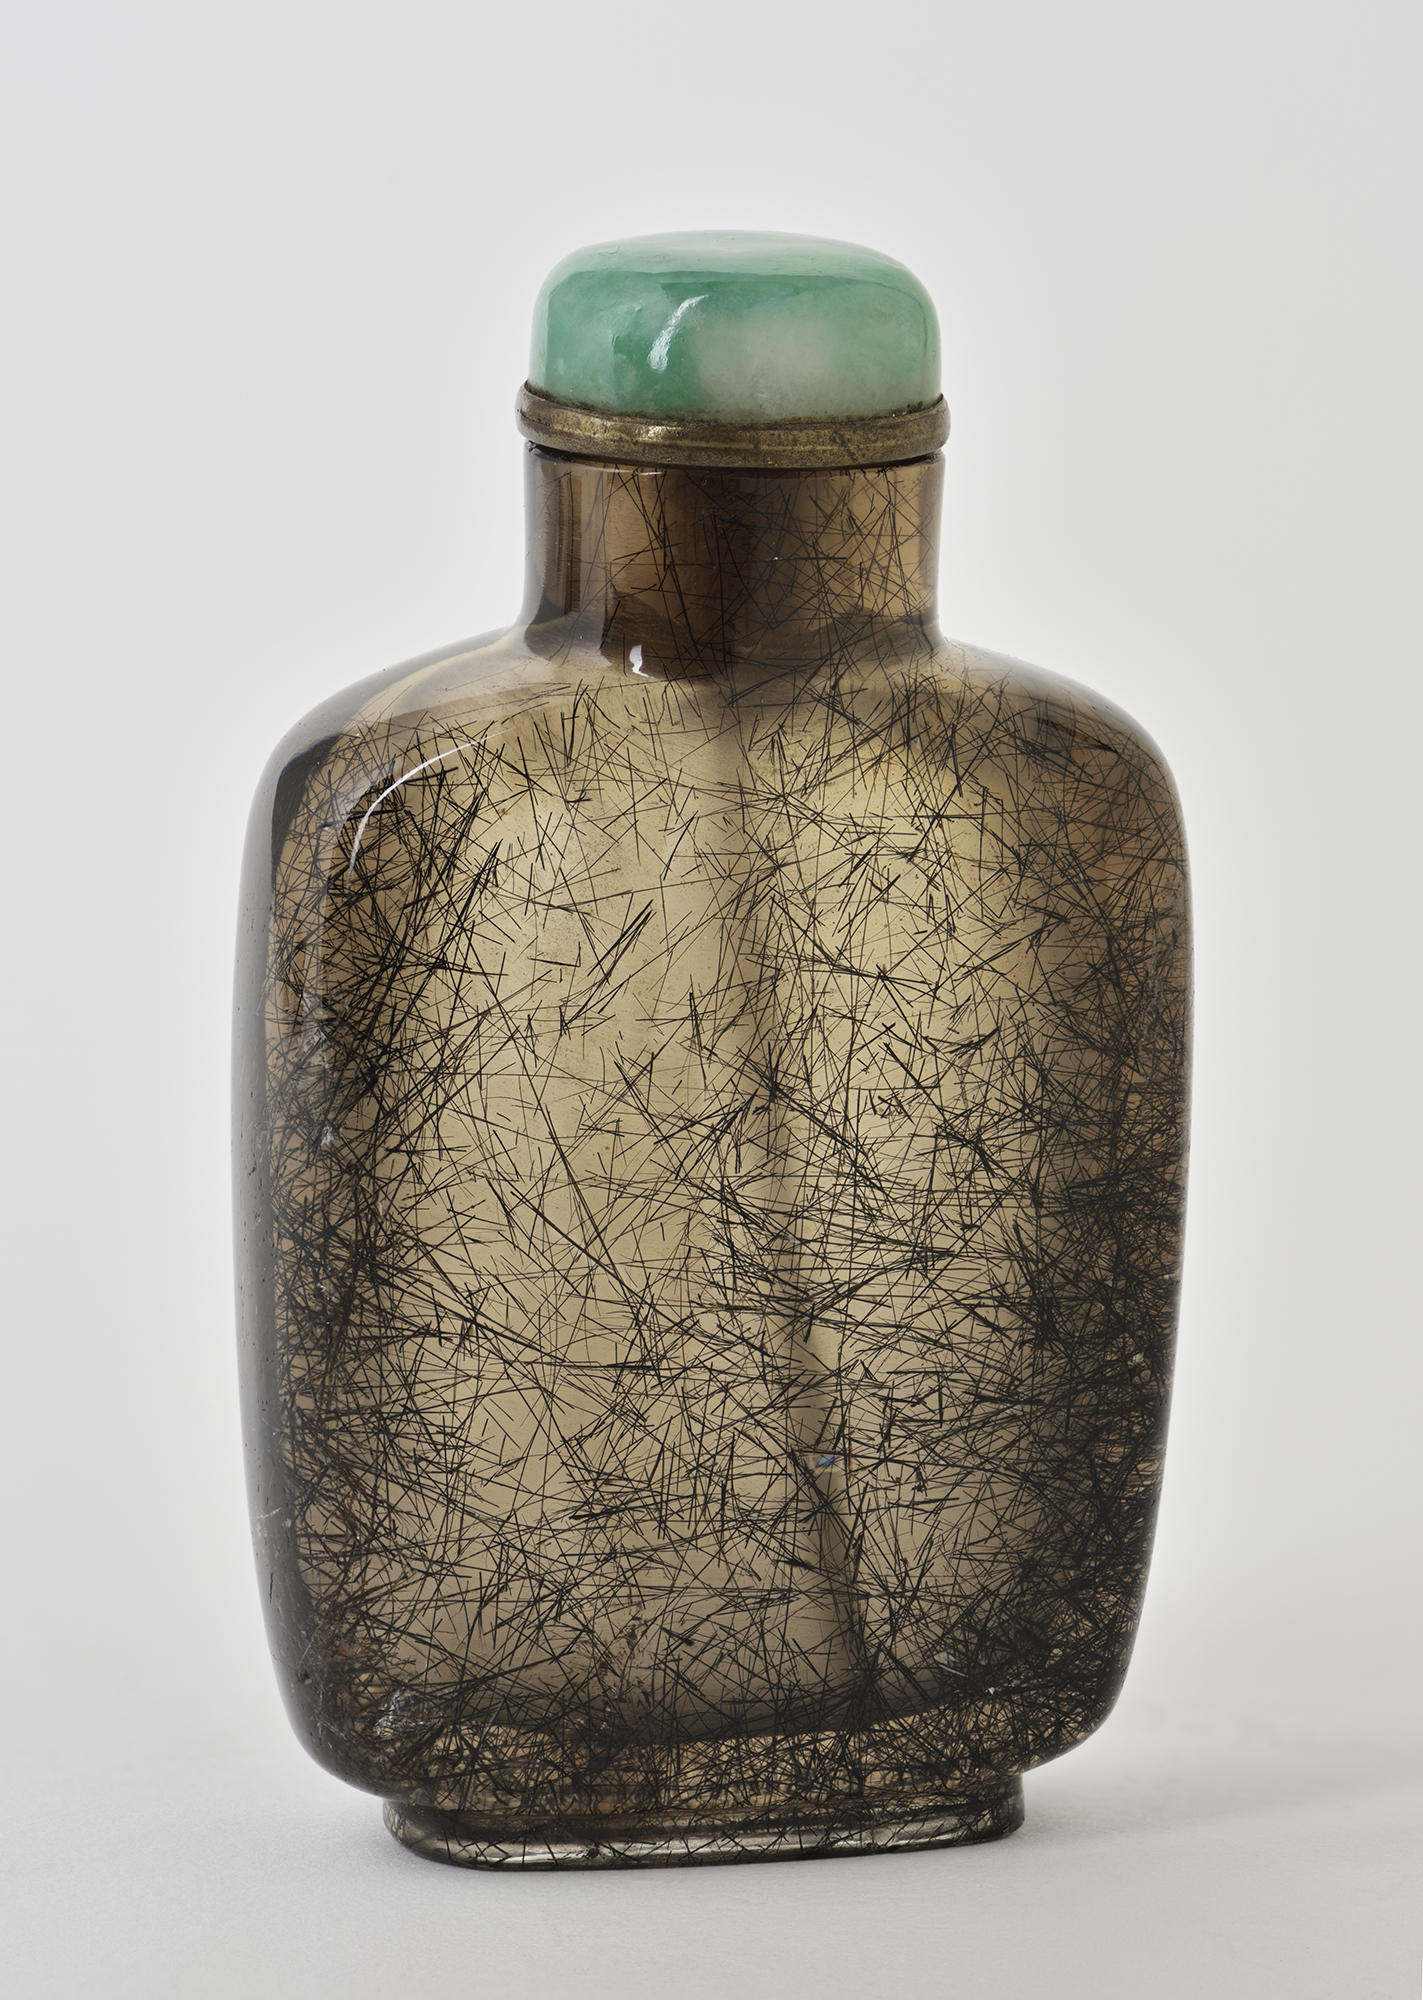 A rectangular snuff bottle with rounded corners with a green stopper. The body of the bottle is brown with black hairline fracture patterns. 